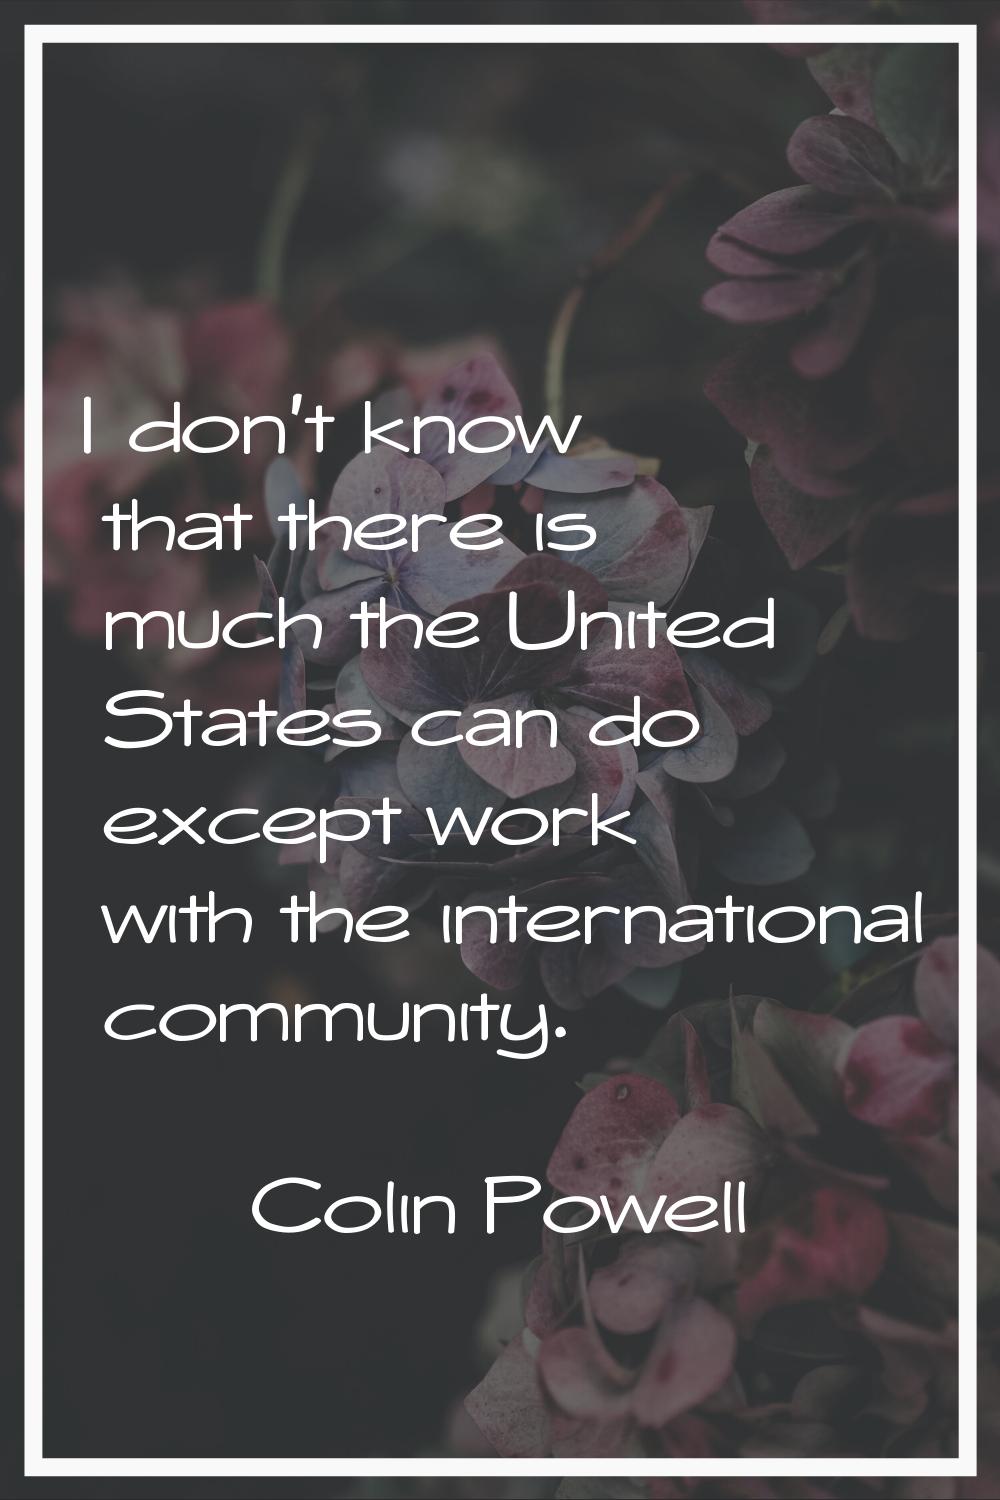 I don't know that there is much the United States can do except work with the international communi